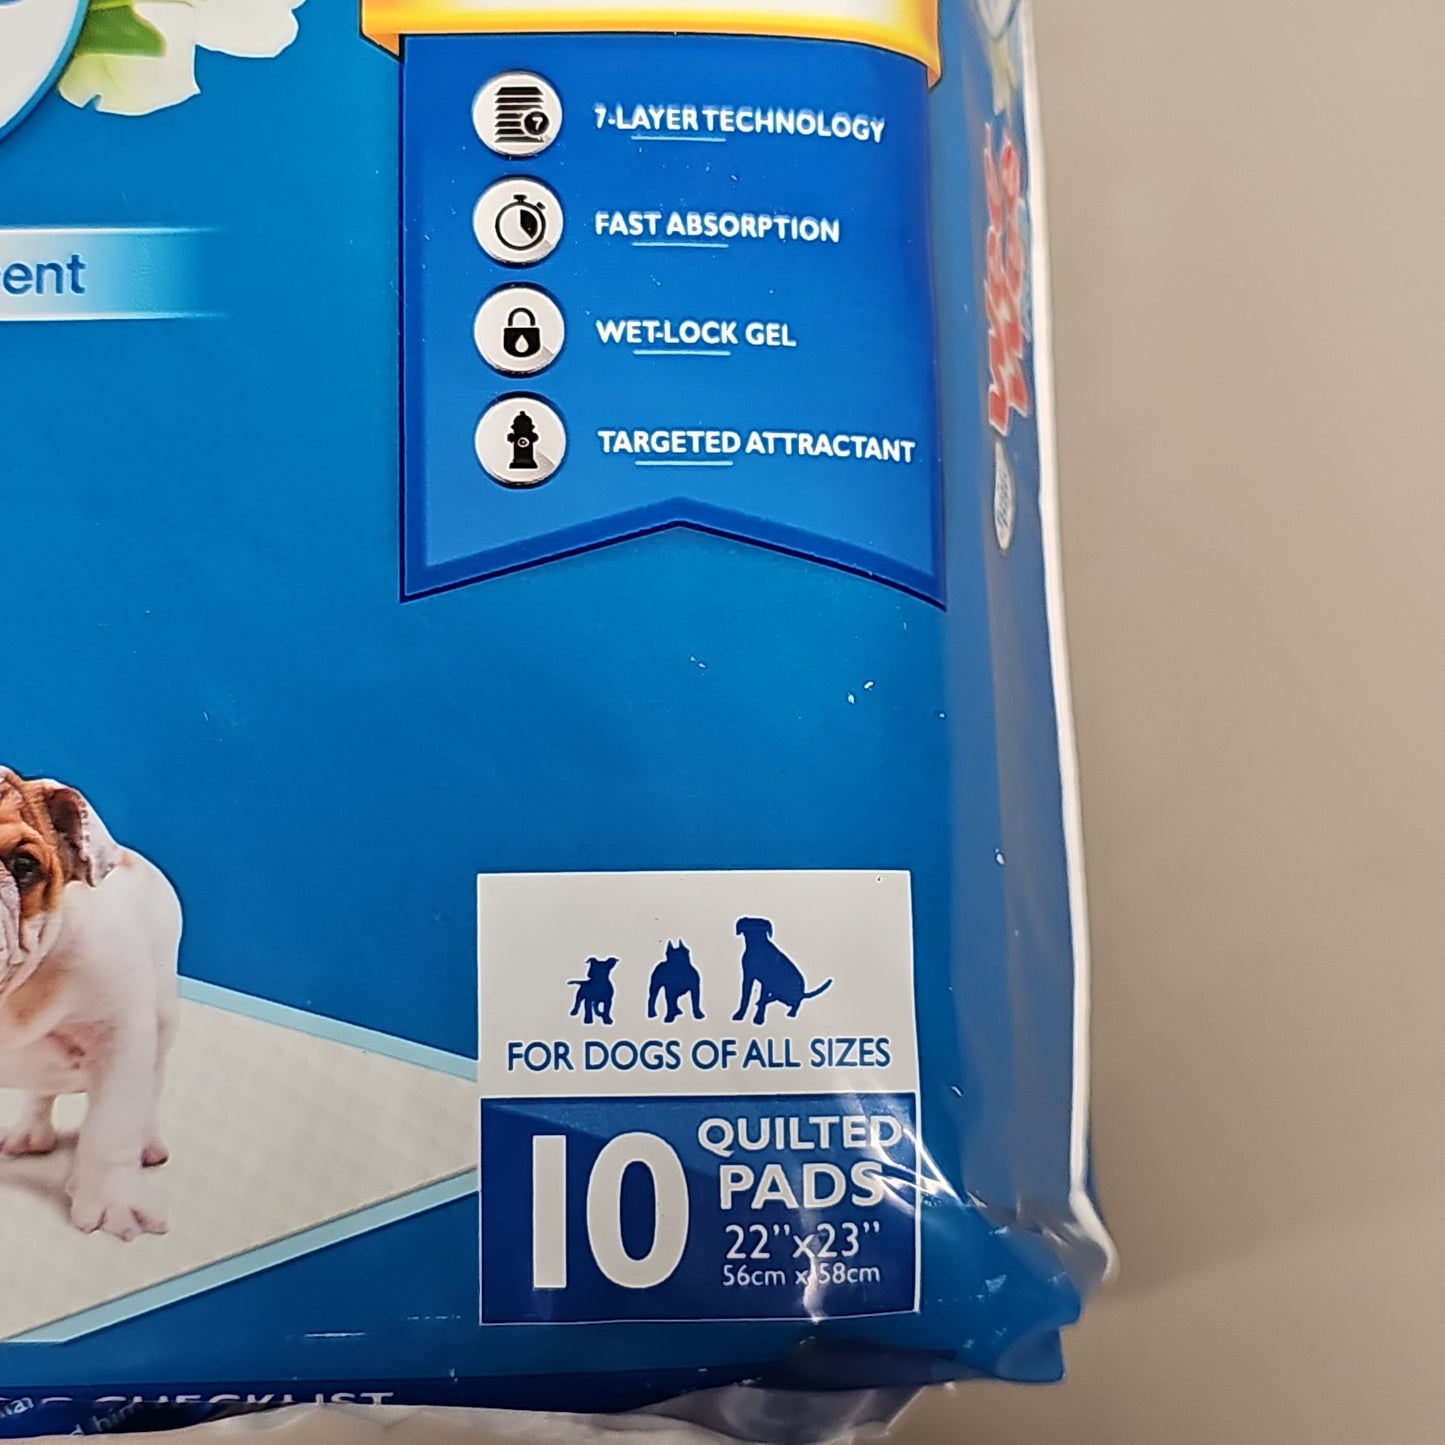 z@ FOUR PAWS Wee-Wee Pee Pads for Dogs Odor Control With Febreeze 10 Pads 100534949 (New)